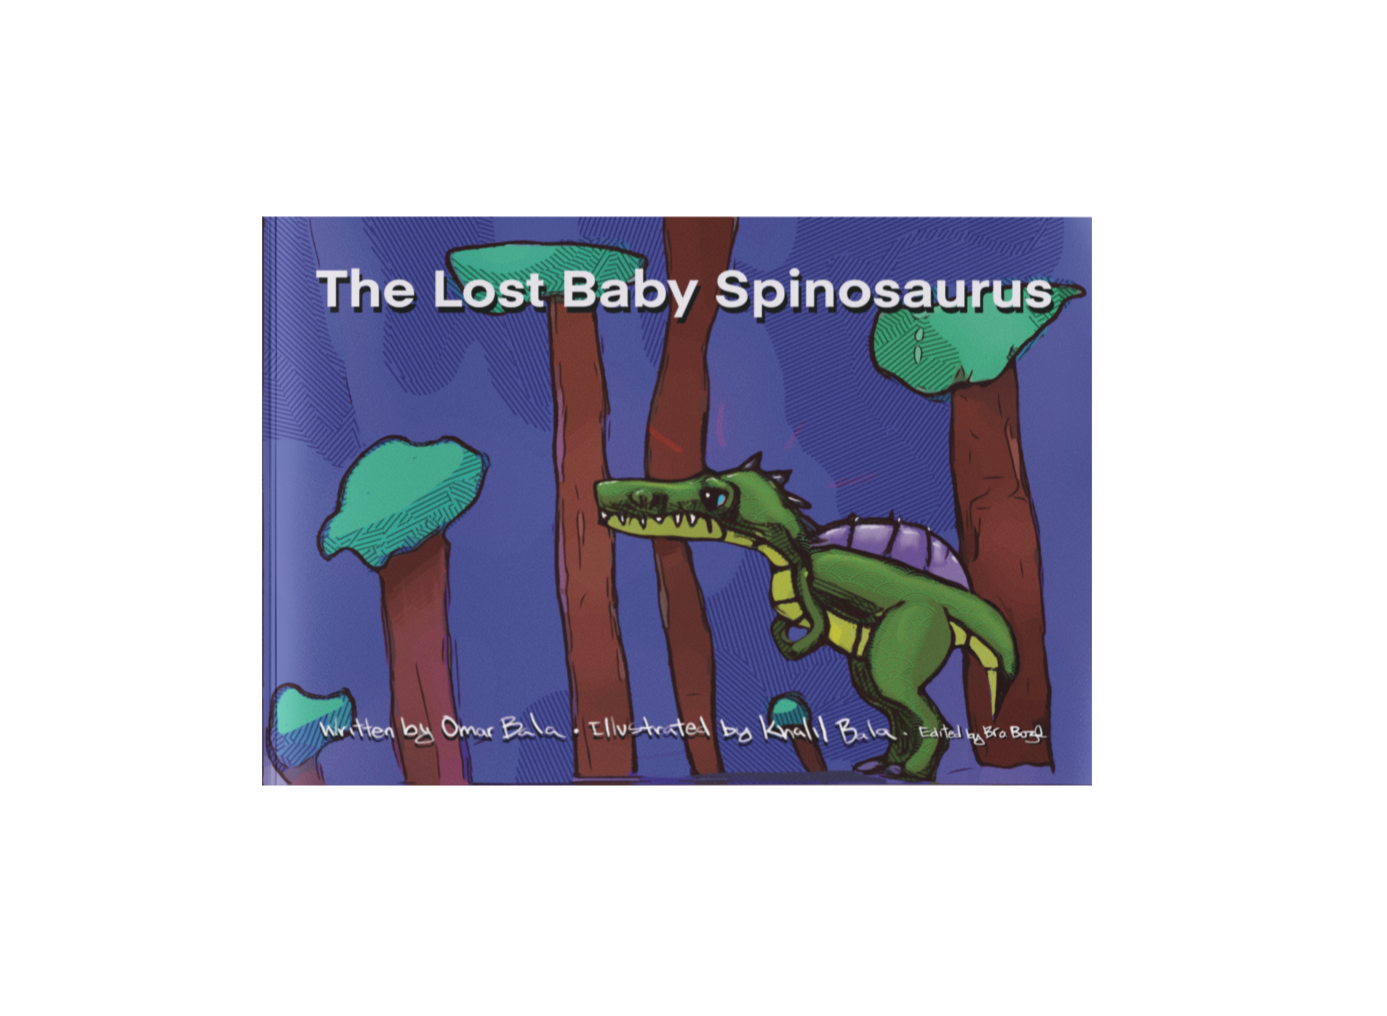 The Lost Baby Spinosaurus